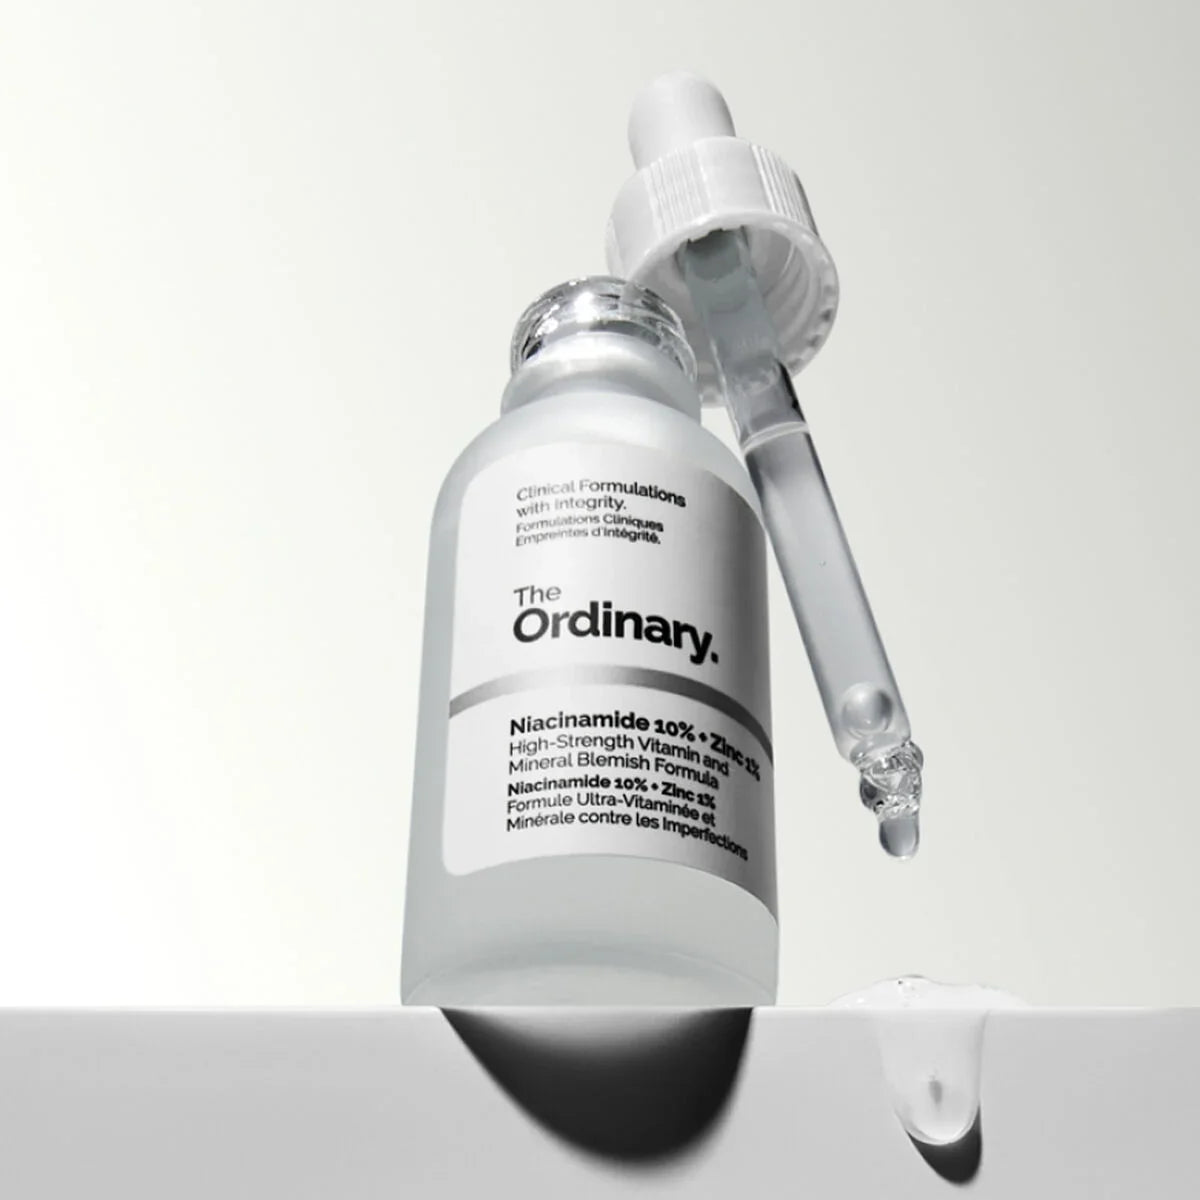 The Ordinary - Niacinamide 10% + Zinc 1% - 30ml Canadian Imported